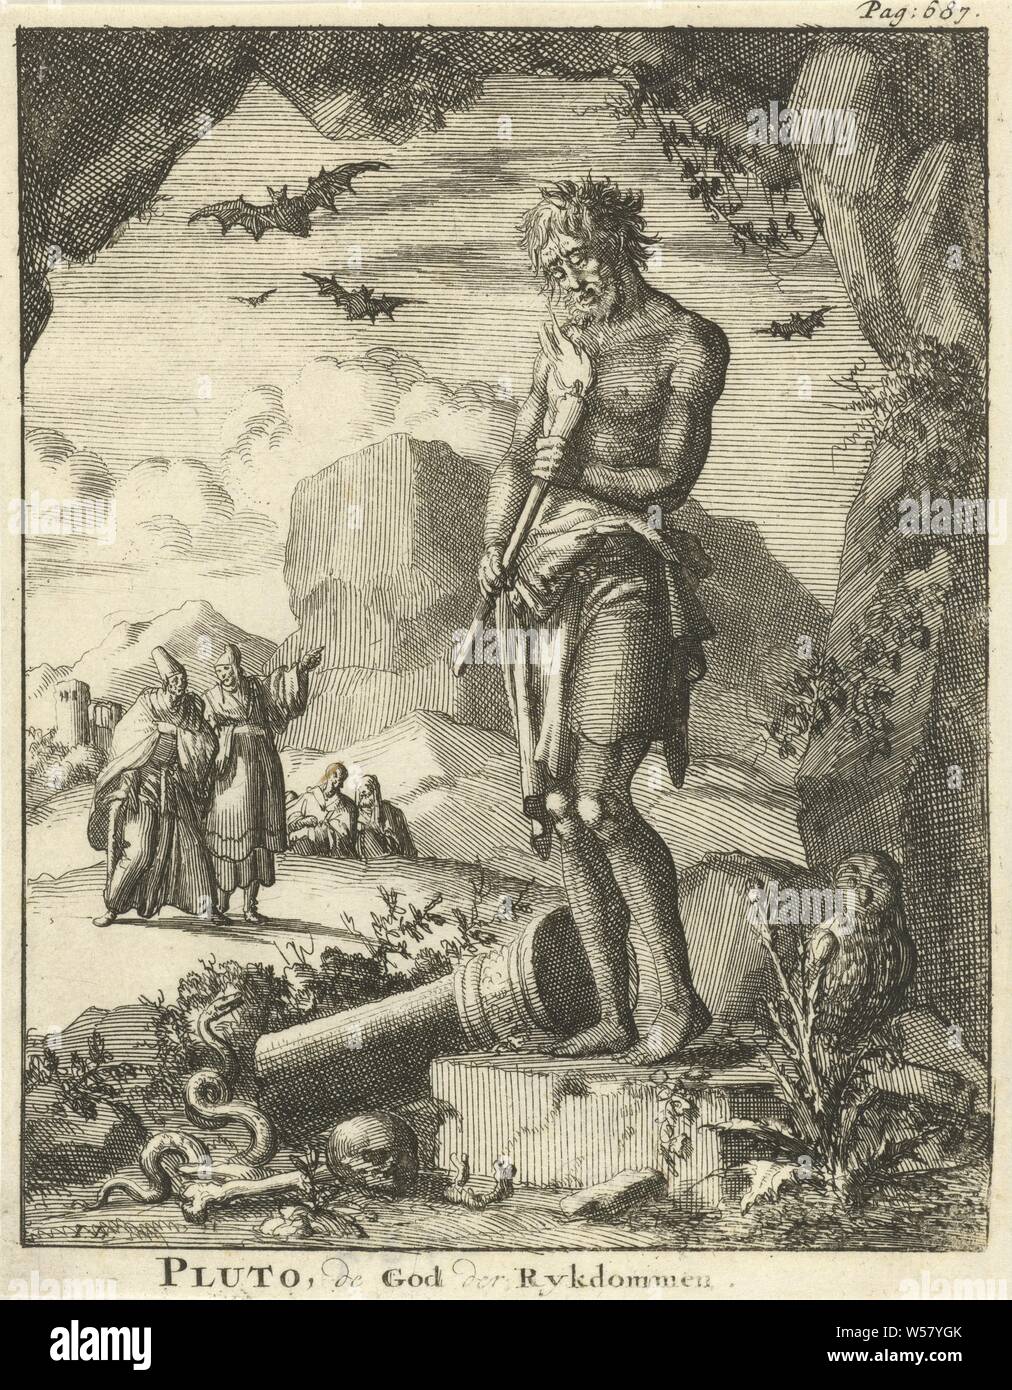 Statue of Pluto Pluto, the God of the Rykdoms (title on object), Print upper right: Pag: 687, (story of) Pluto (Hades), Dis Pater, Orcus, statues, paintings, etc., objects of worship in Roman religion, Jan Luyken (mentioned on object), Amsterdam, 1686, paper, etching, h 166 mm × w 130 mm Stock Photo